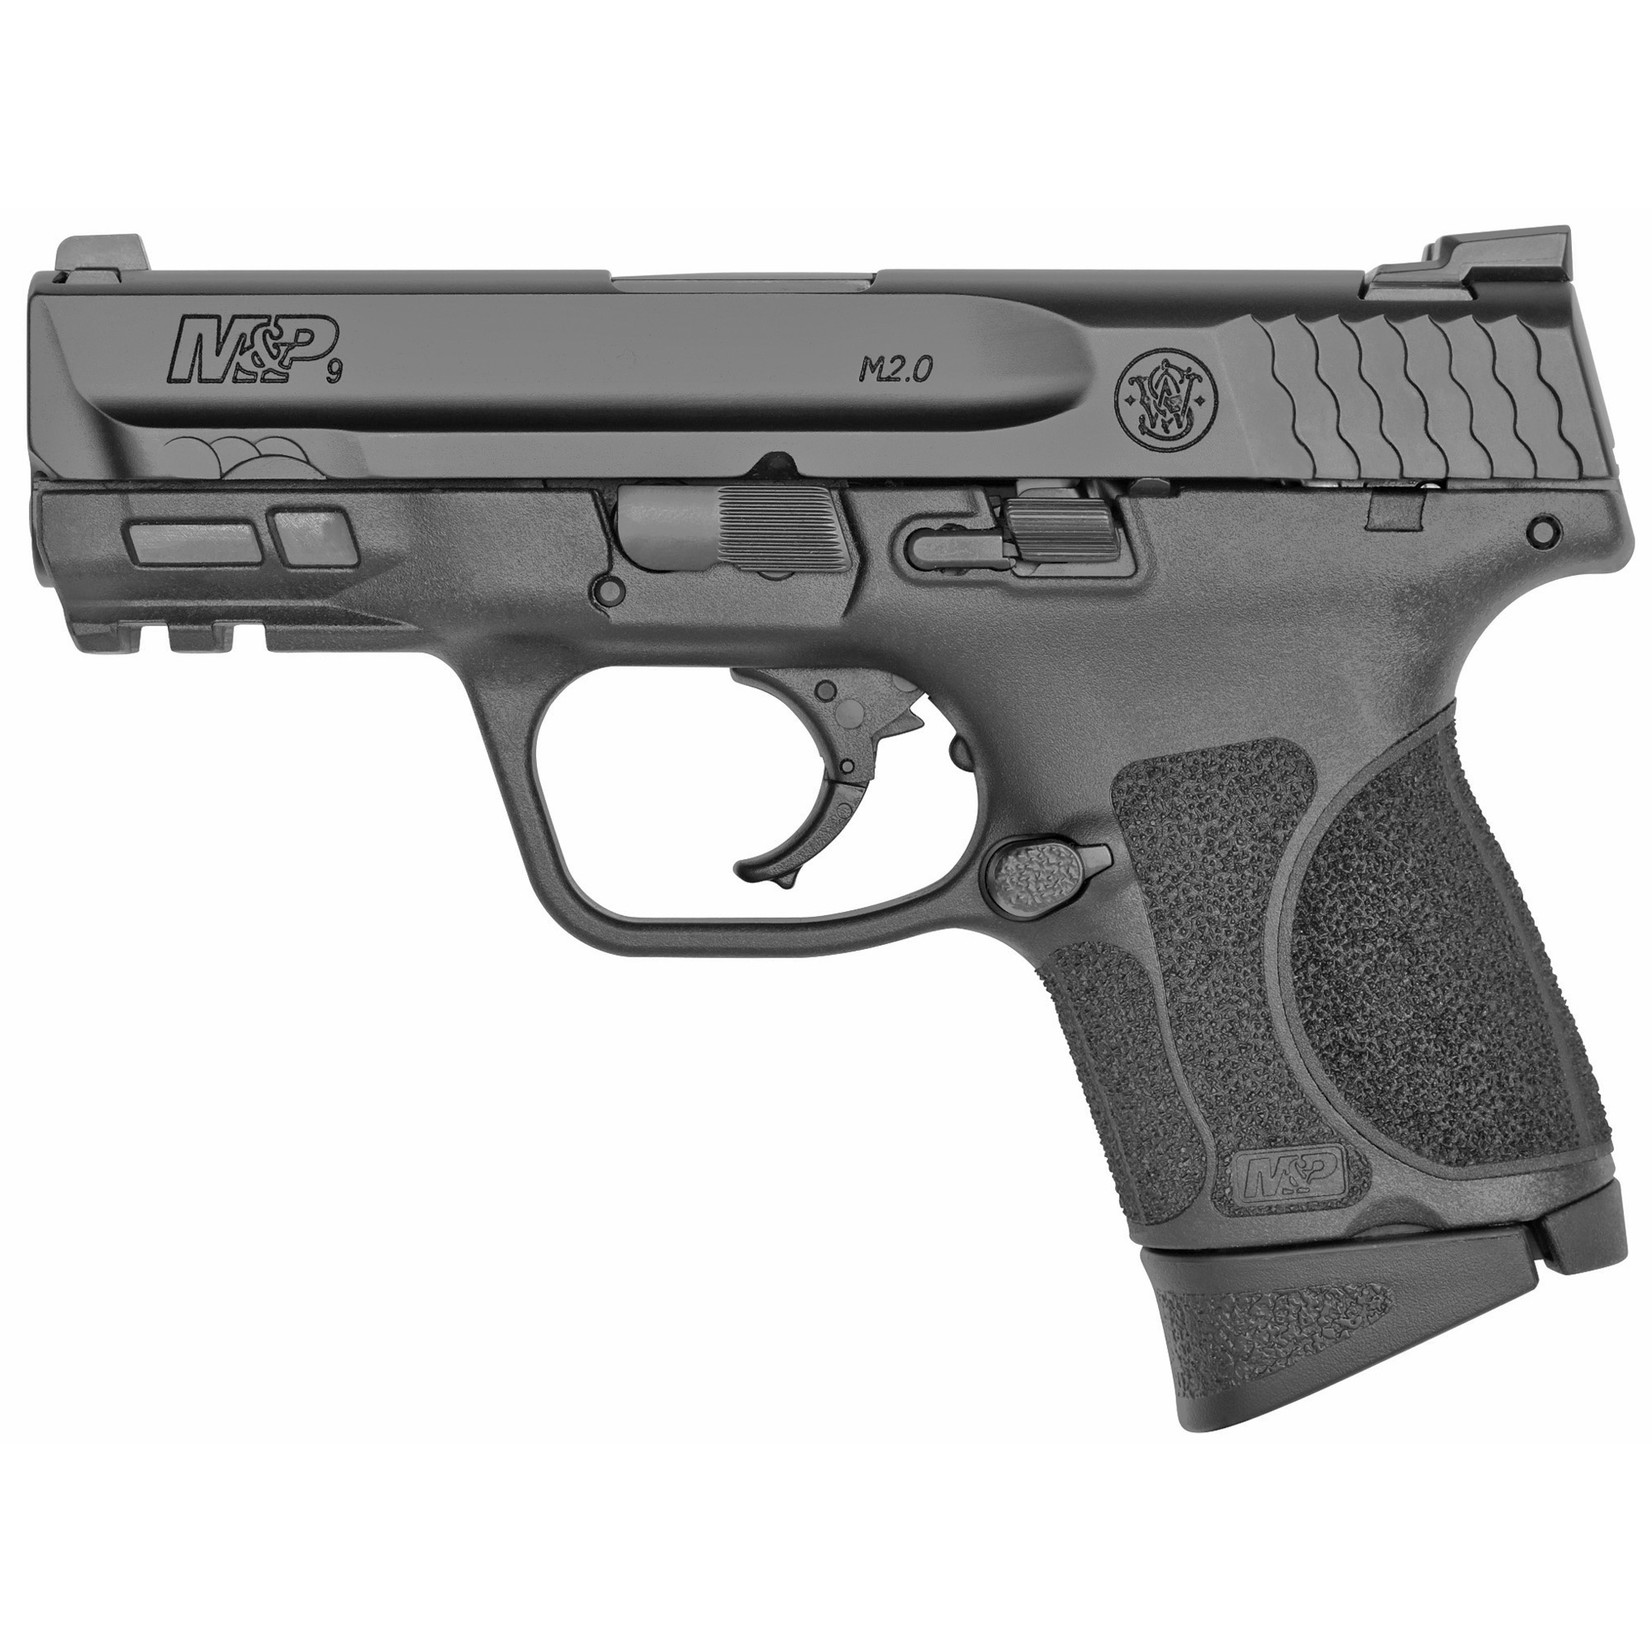 SMITH & WESSON SMITH & WESSON M&P9 M2.0 9MM 12RD 3.6" BBL NO THUMB SAFETY